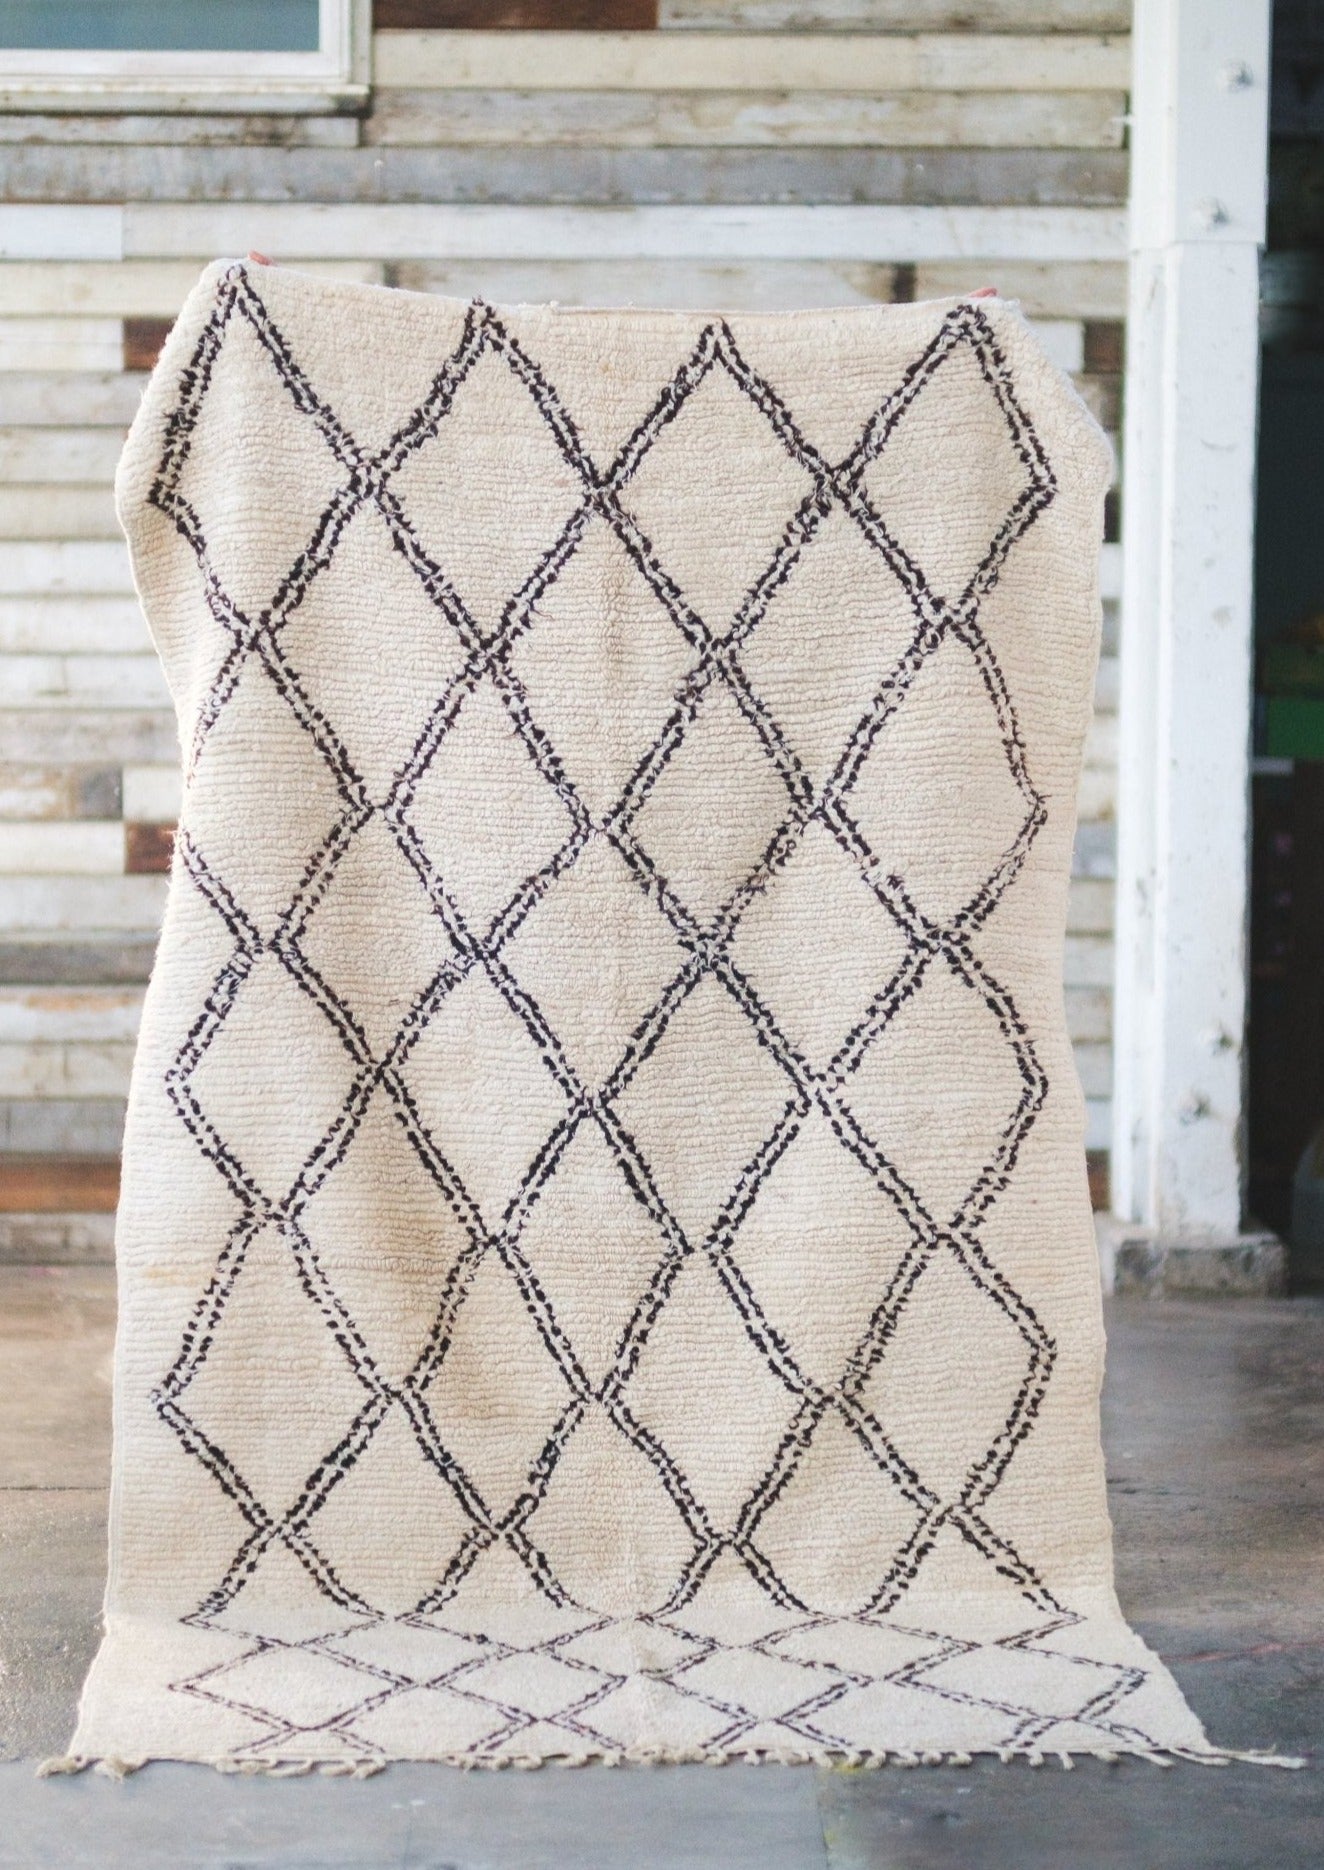 classic beni ourain rug is displayed against a rustic barn wall and cement floors. white wool decorated with black diamonds all natural dye 